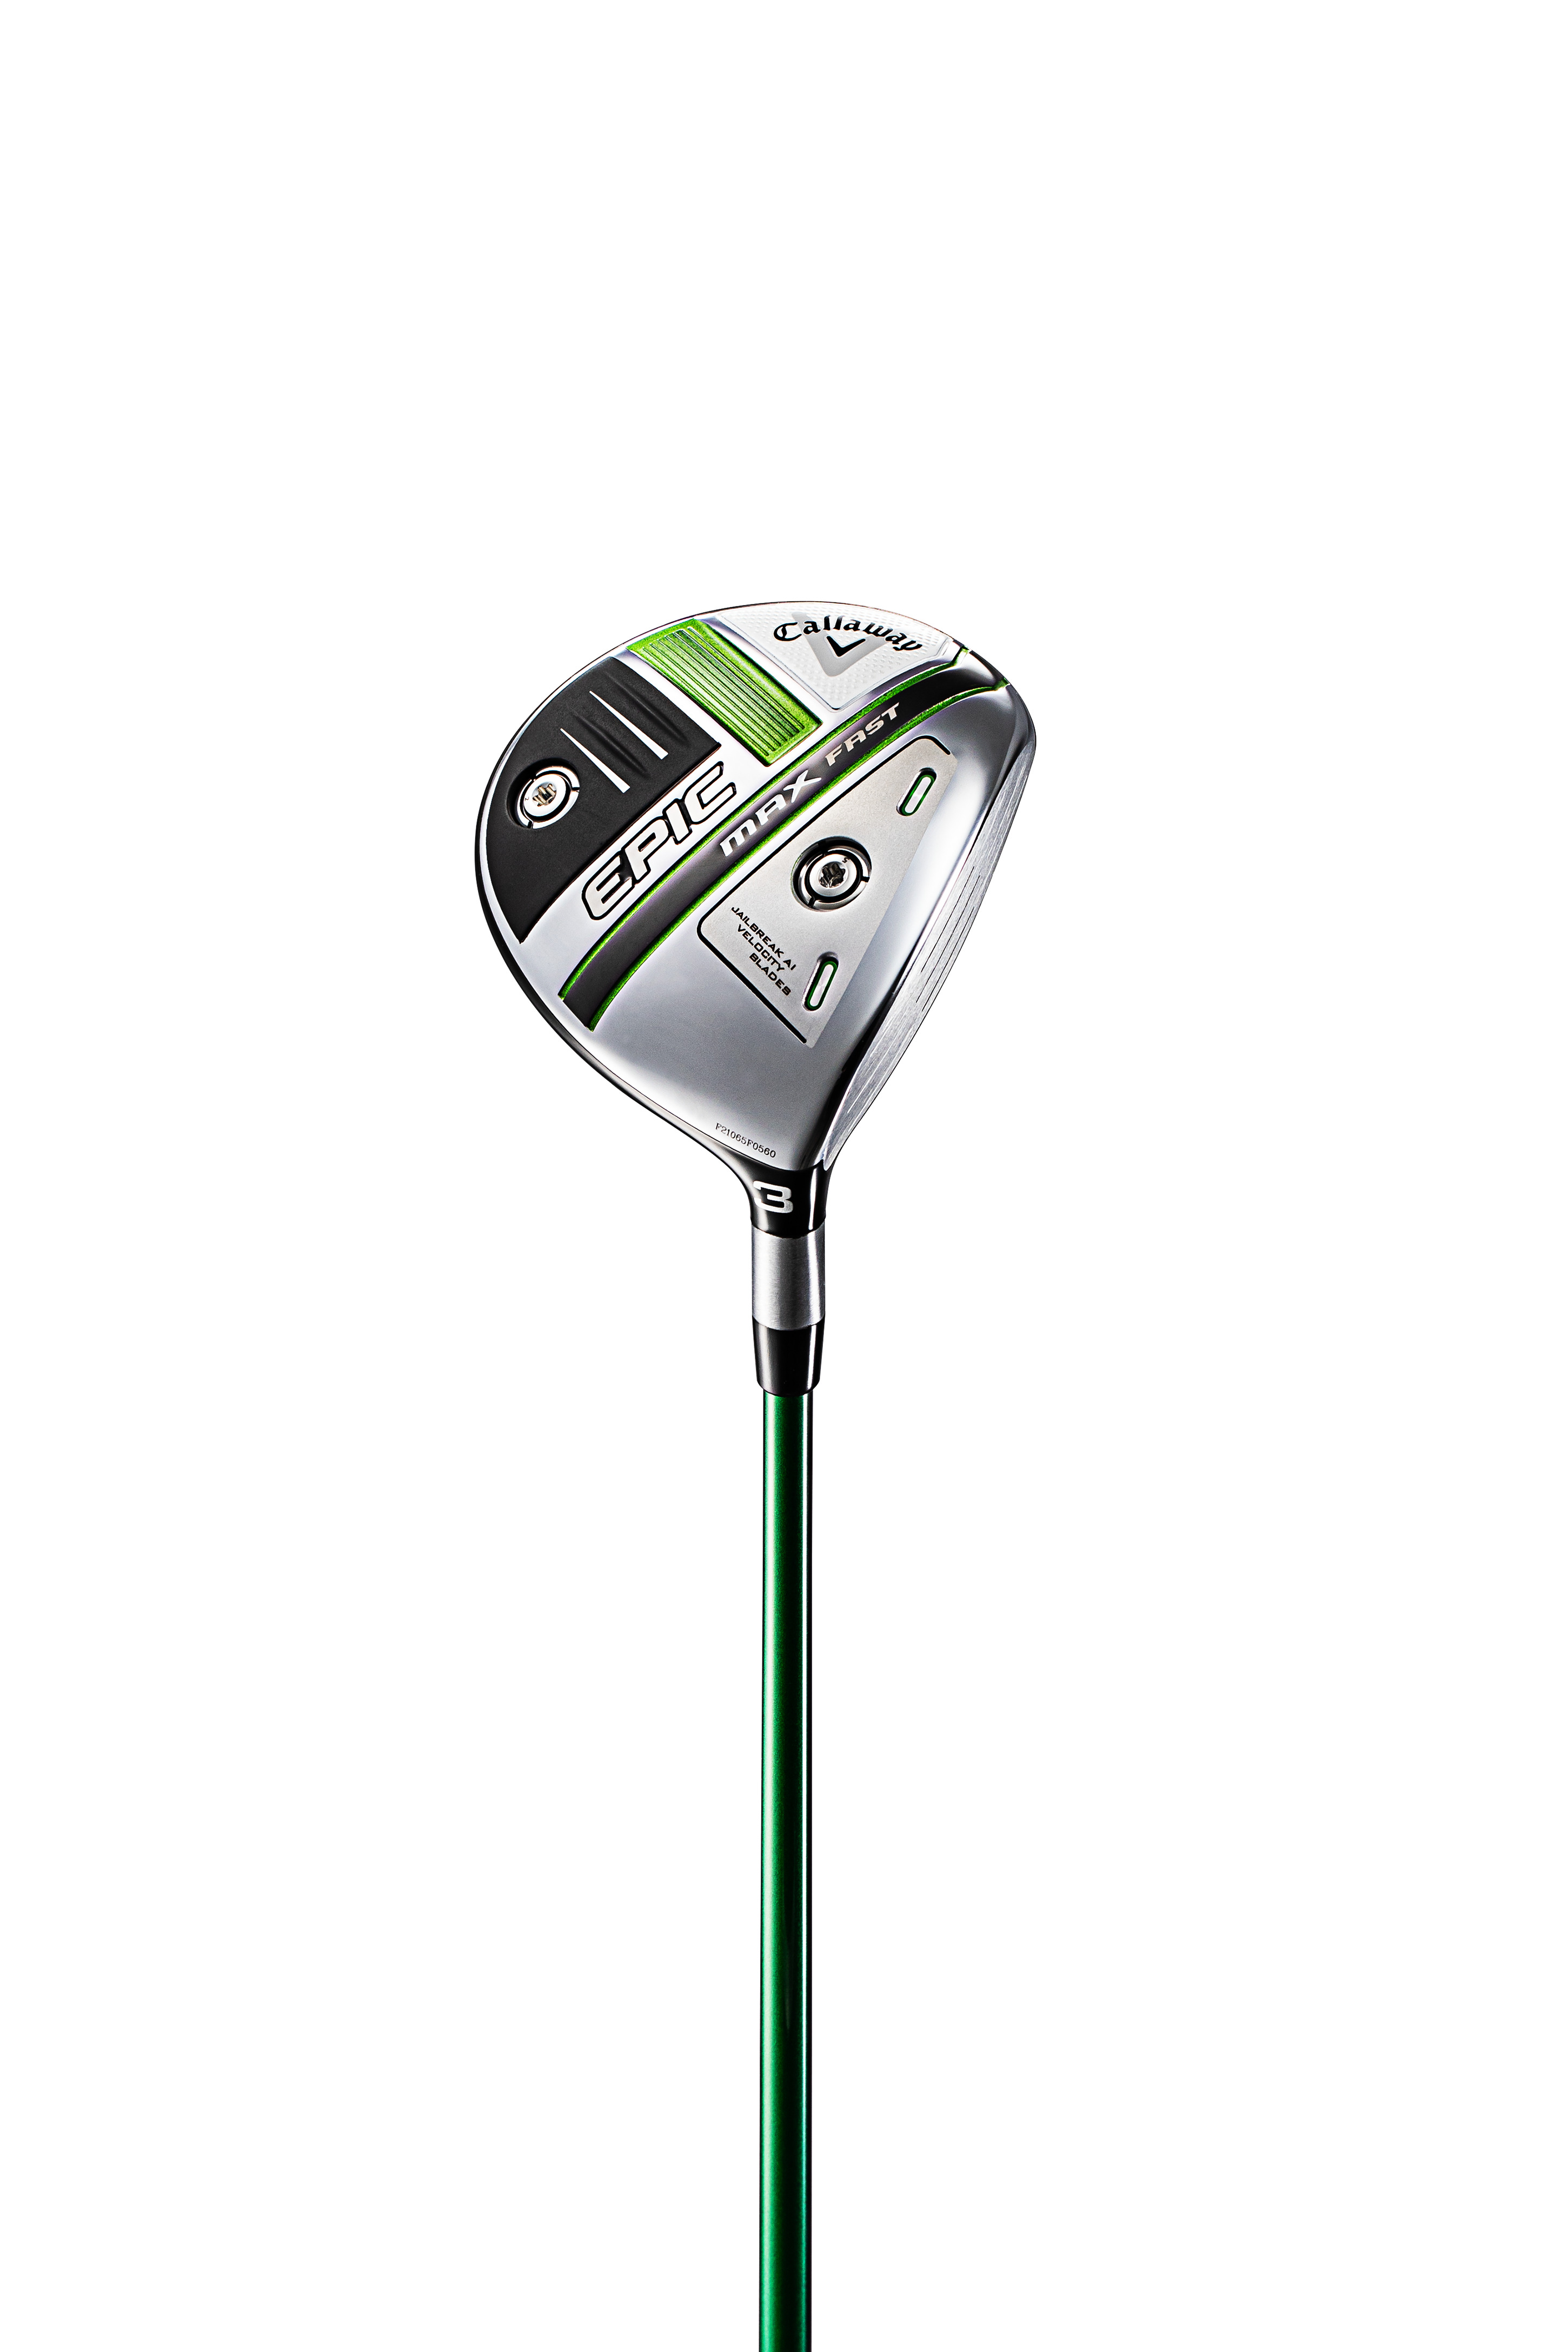 Callaway's Epic Max Fast Series Offers Max Speed and Flight Via